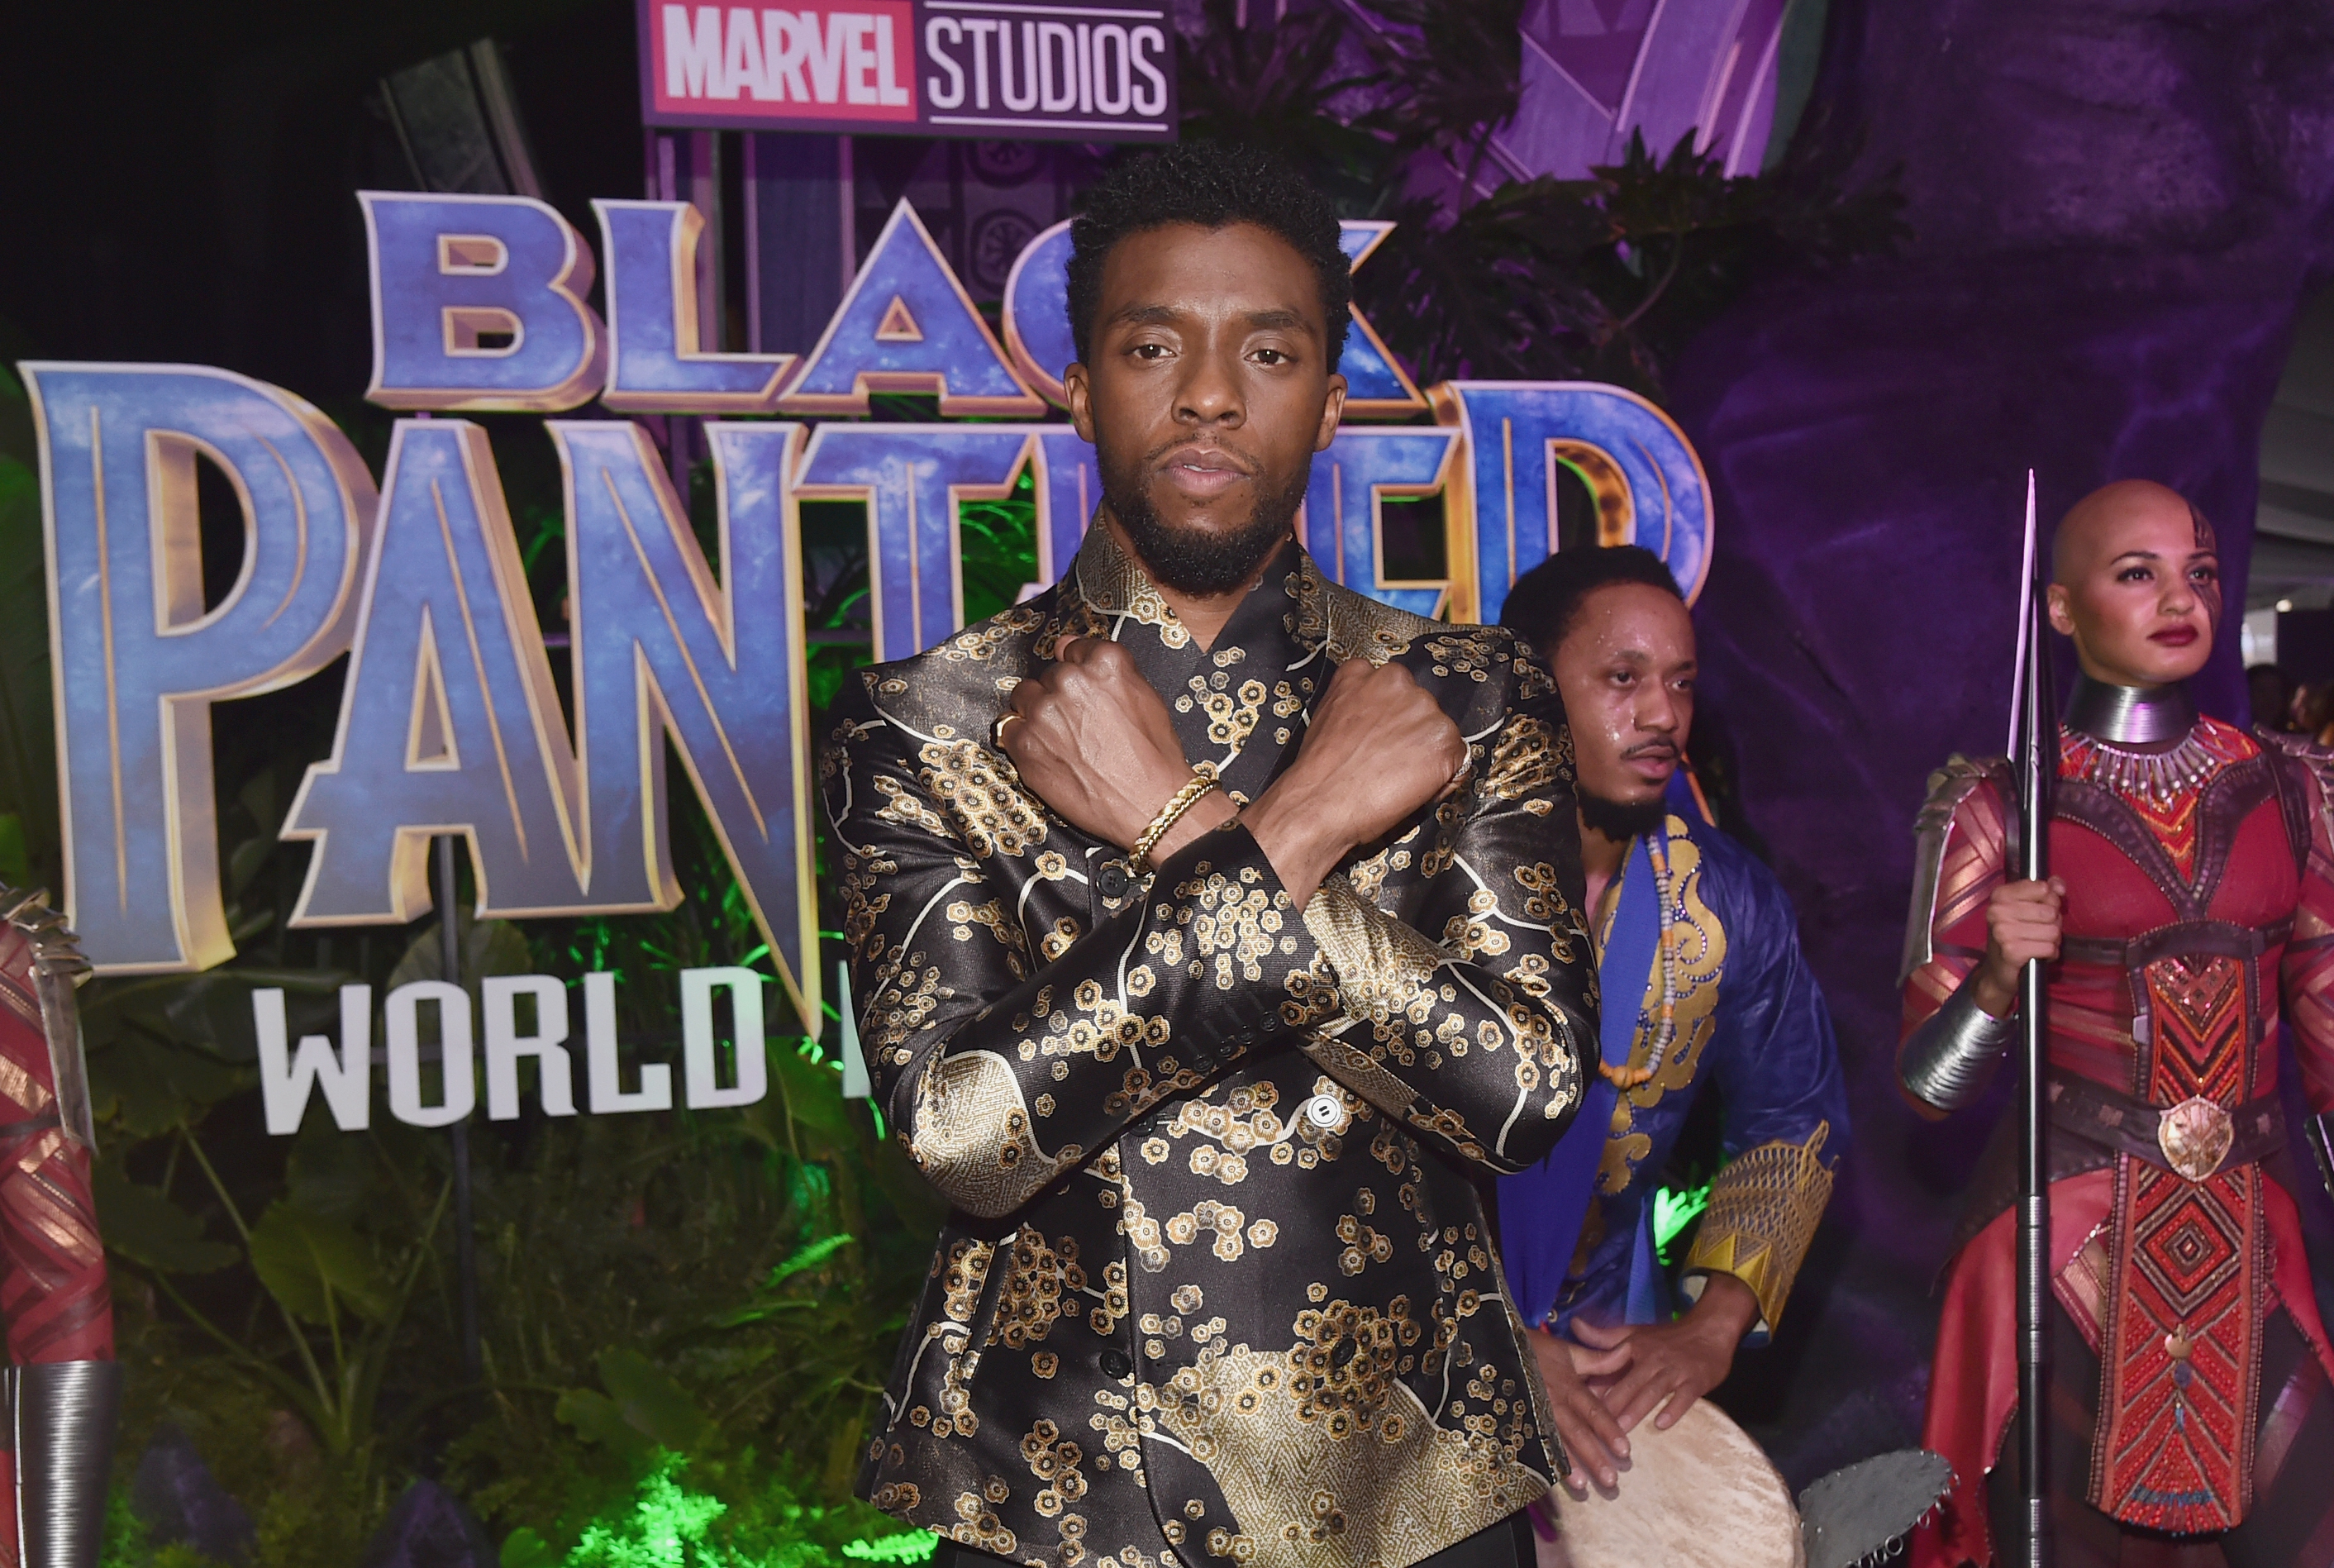 Chadwick Boseman in front of a Black Panther sign